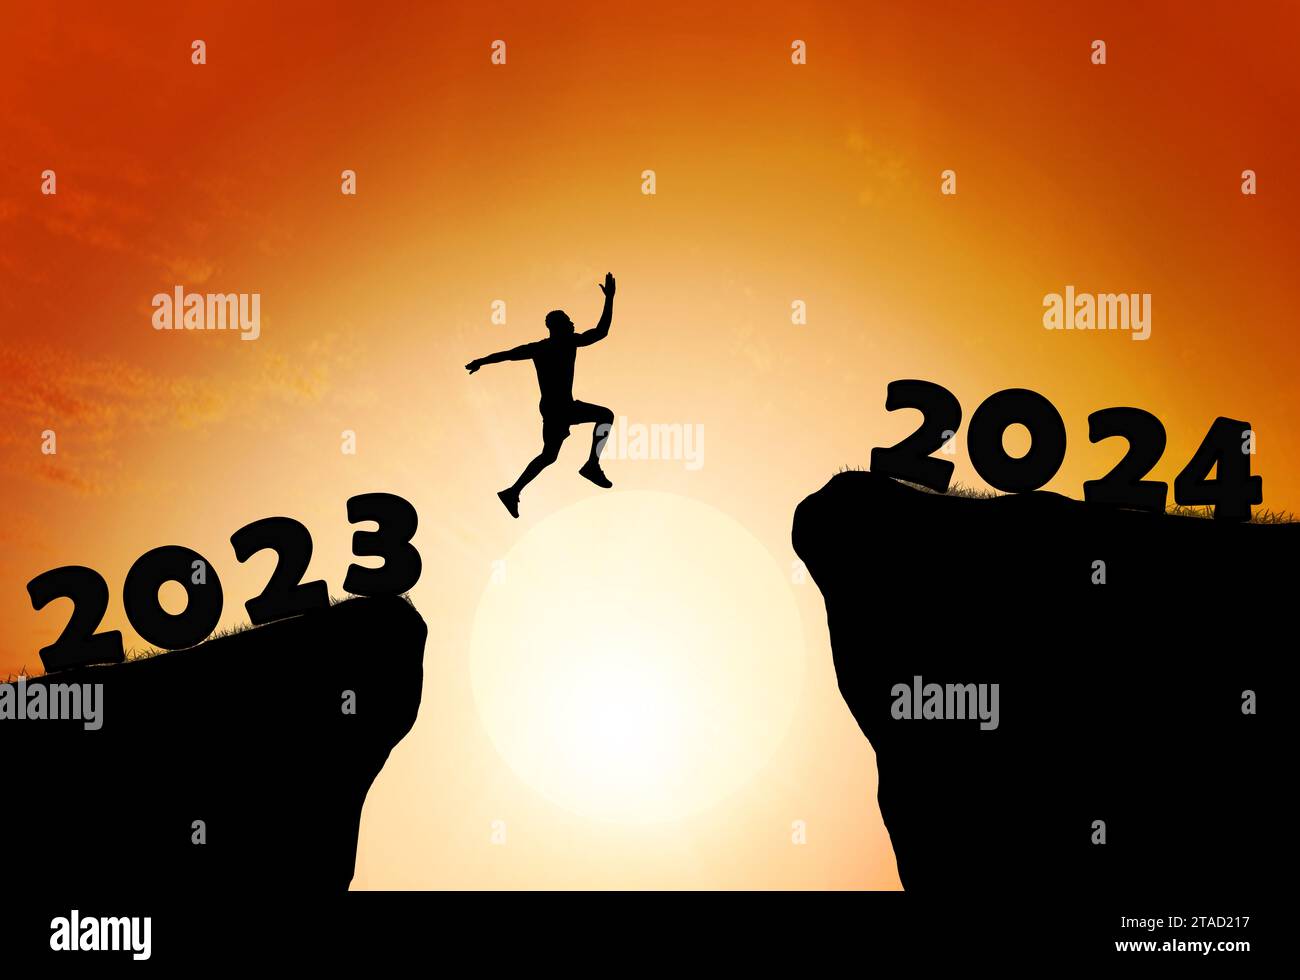 Greetings and have a great Christmas and new year in 2024.silhouette of a man leaping from a cliff in 2023 to one in 2024 under a cloudy and sunny sky Stock Photo